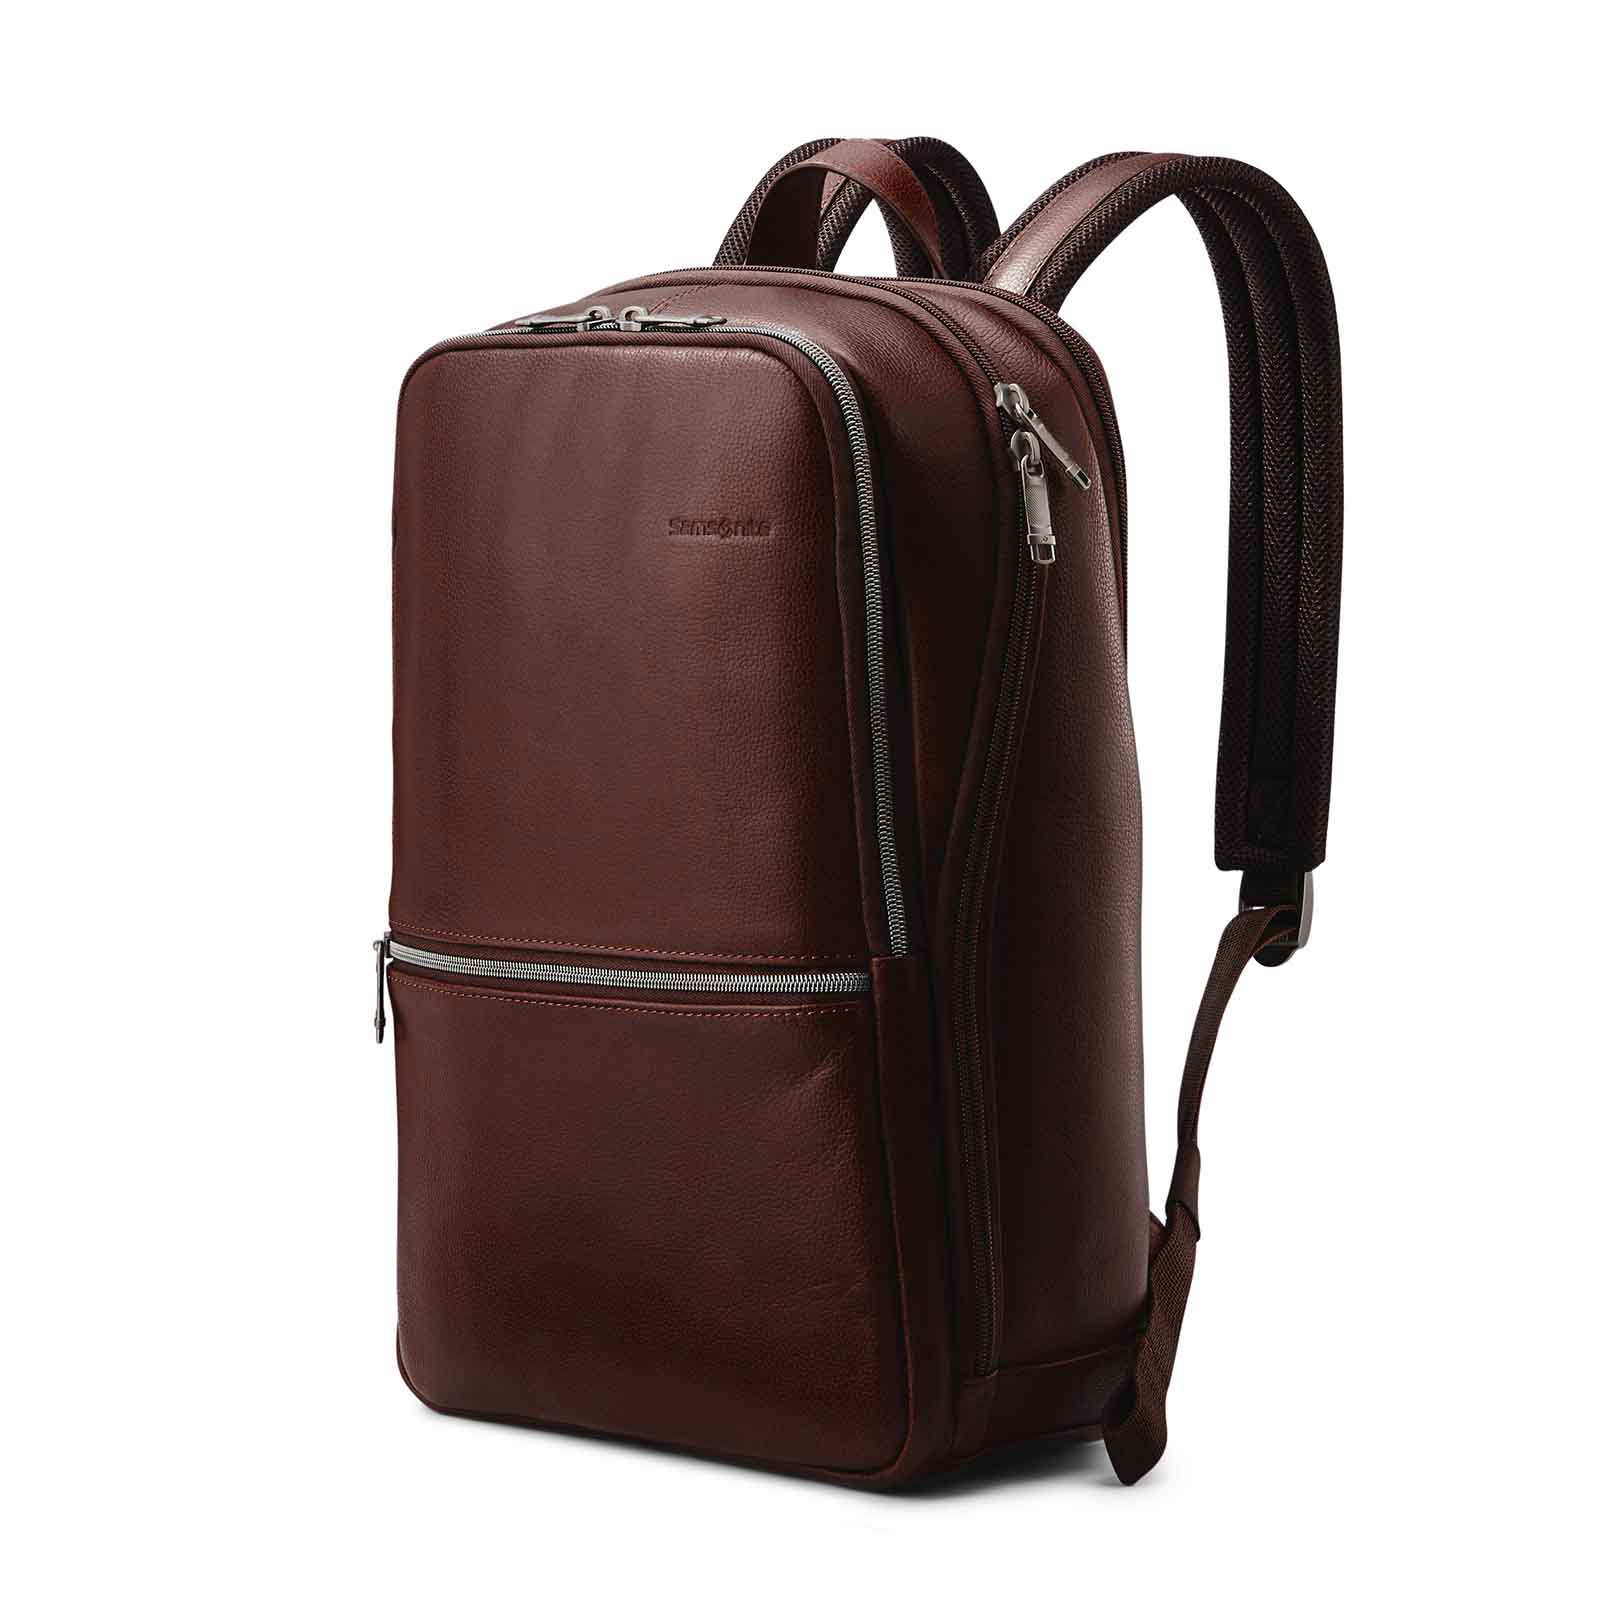 Samsonite-Classic-Leather-14-Inch-Laptop-Backpack-Mahogany-Front-Angle